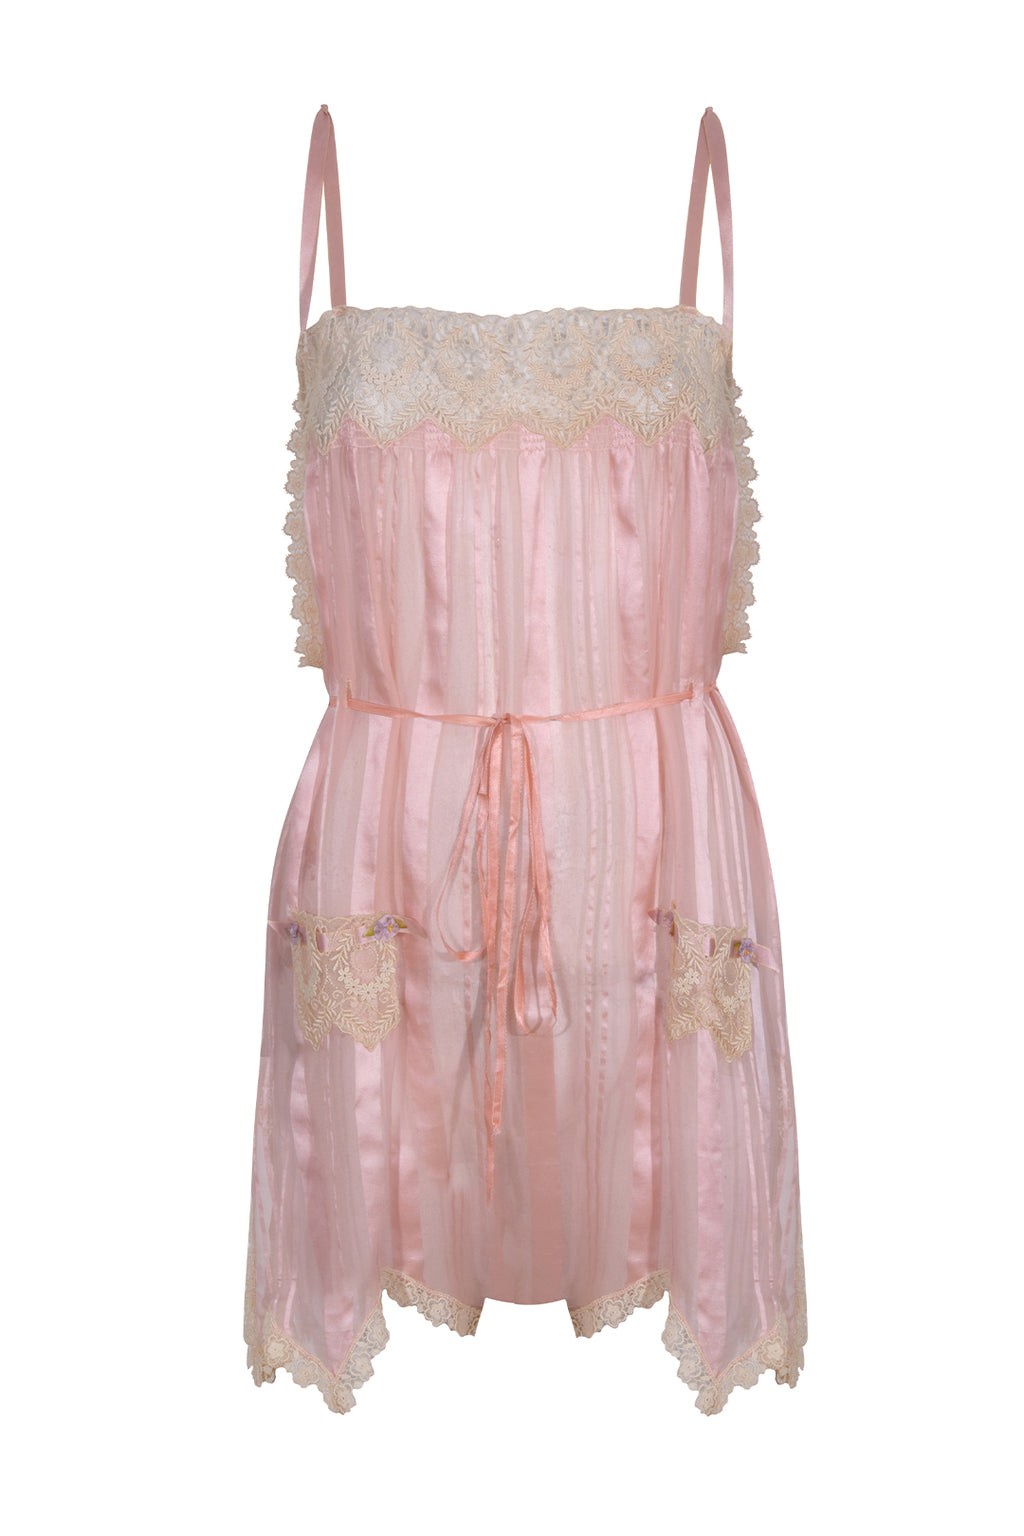 1920's Pink Silk Lace Teddy